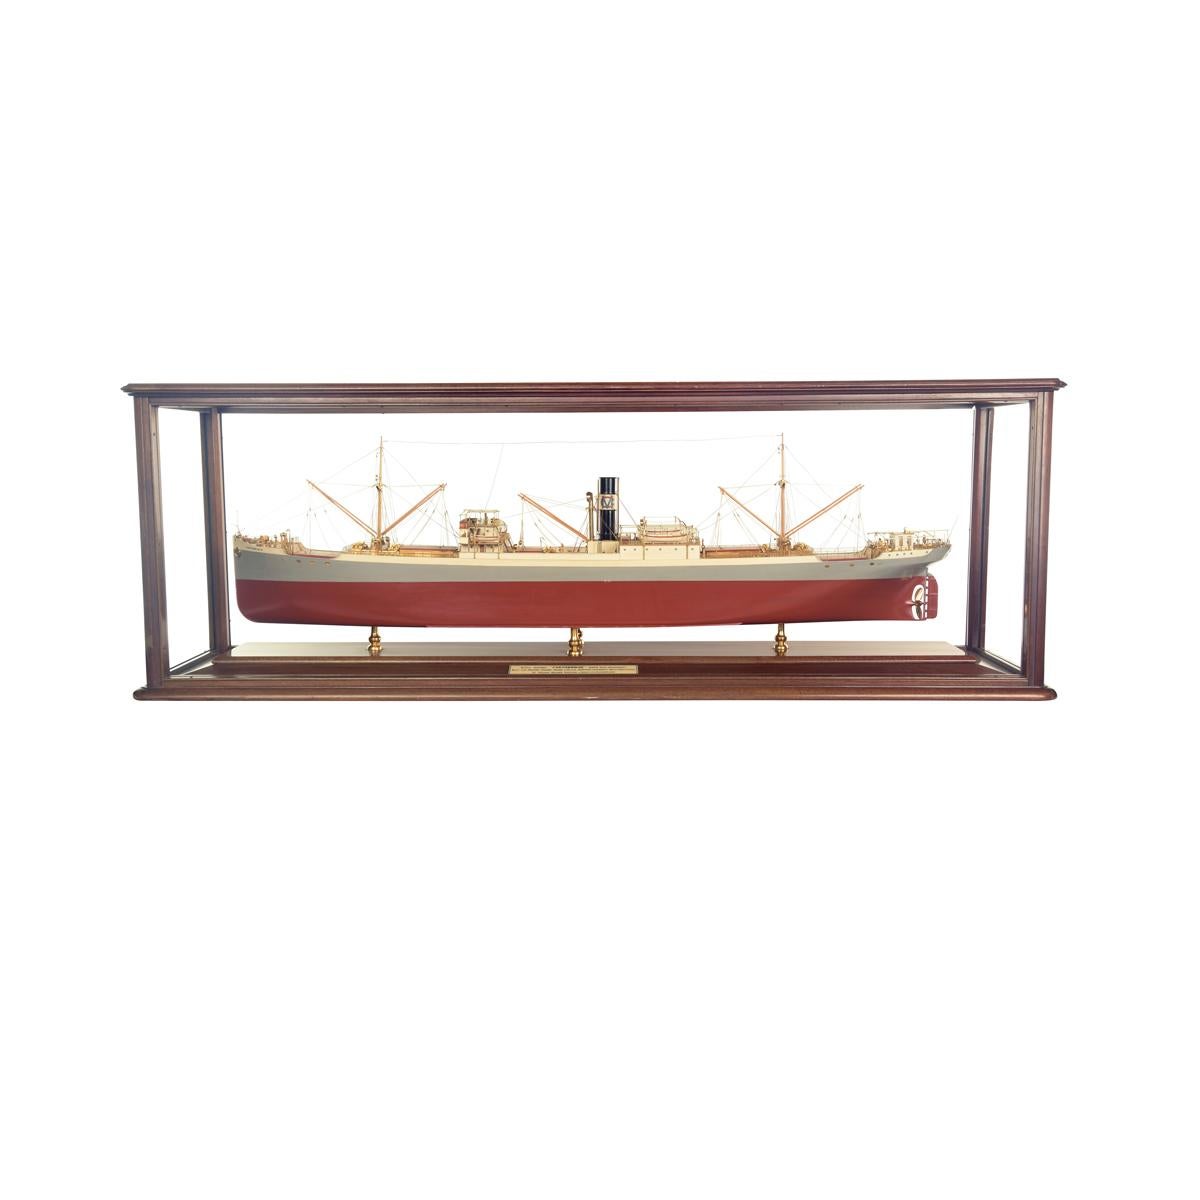 English Fine Owner’s Model of the Freighter S.S. Forthbridge